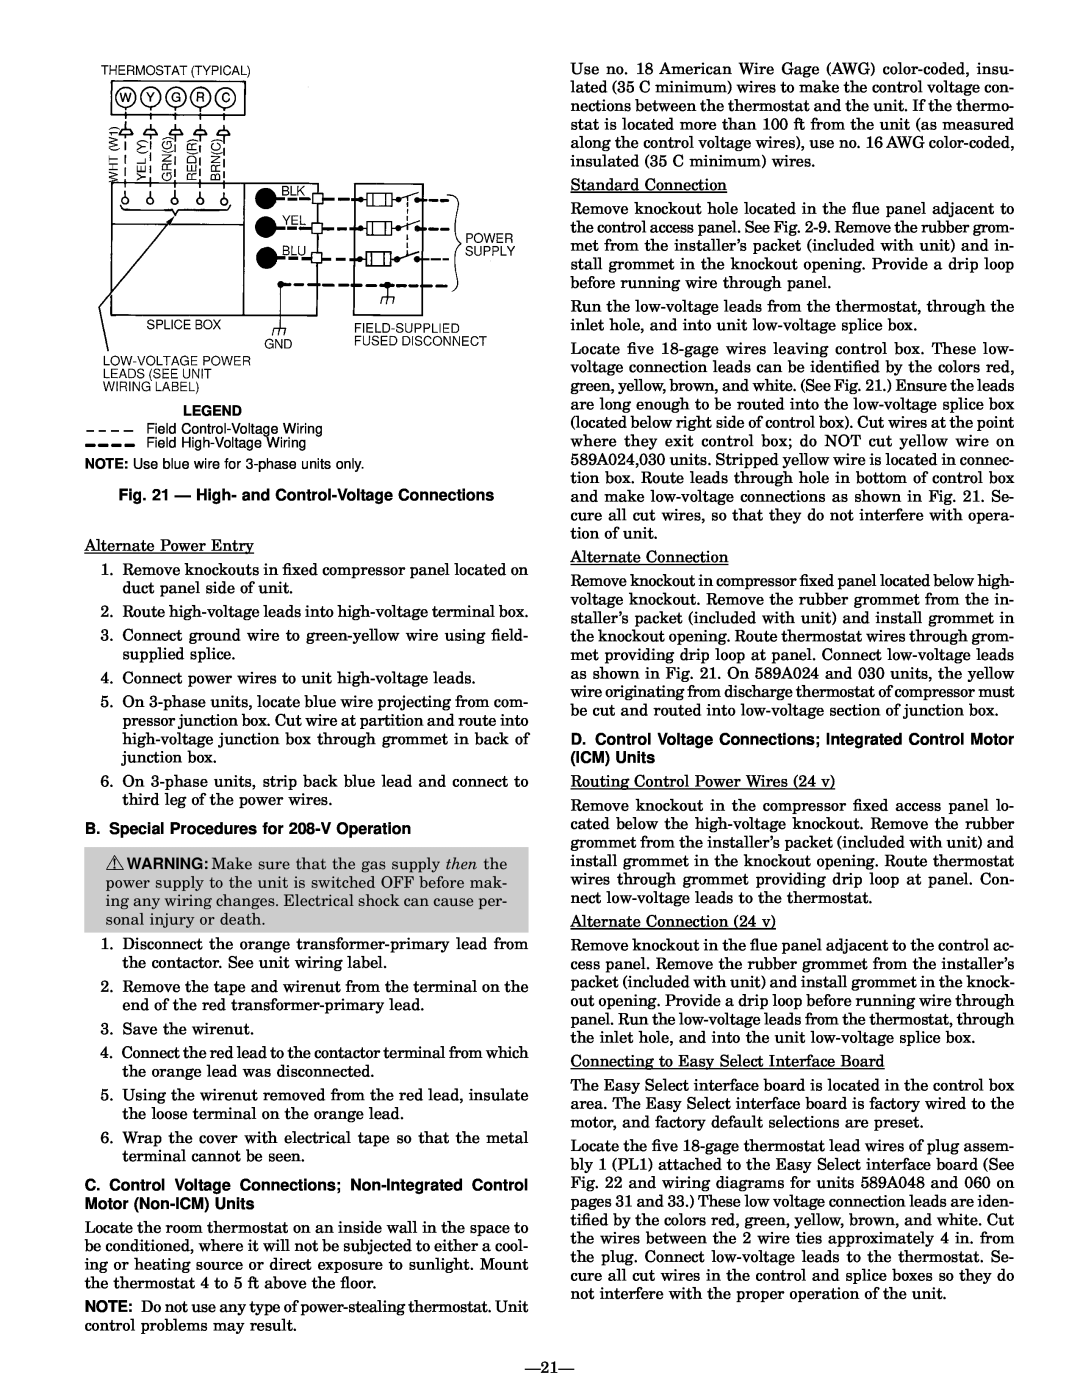 Bryant 589A, 588A user manual Ð High- and Control-VoltageConnections, B.Special Procedures for 208-VOperation 